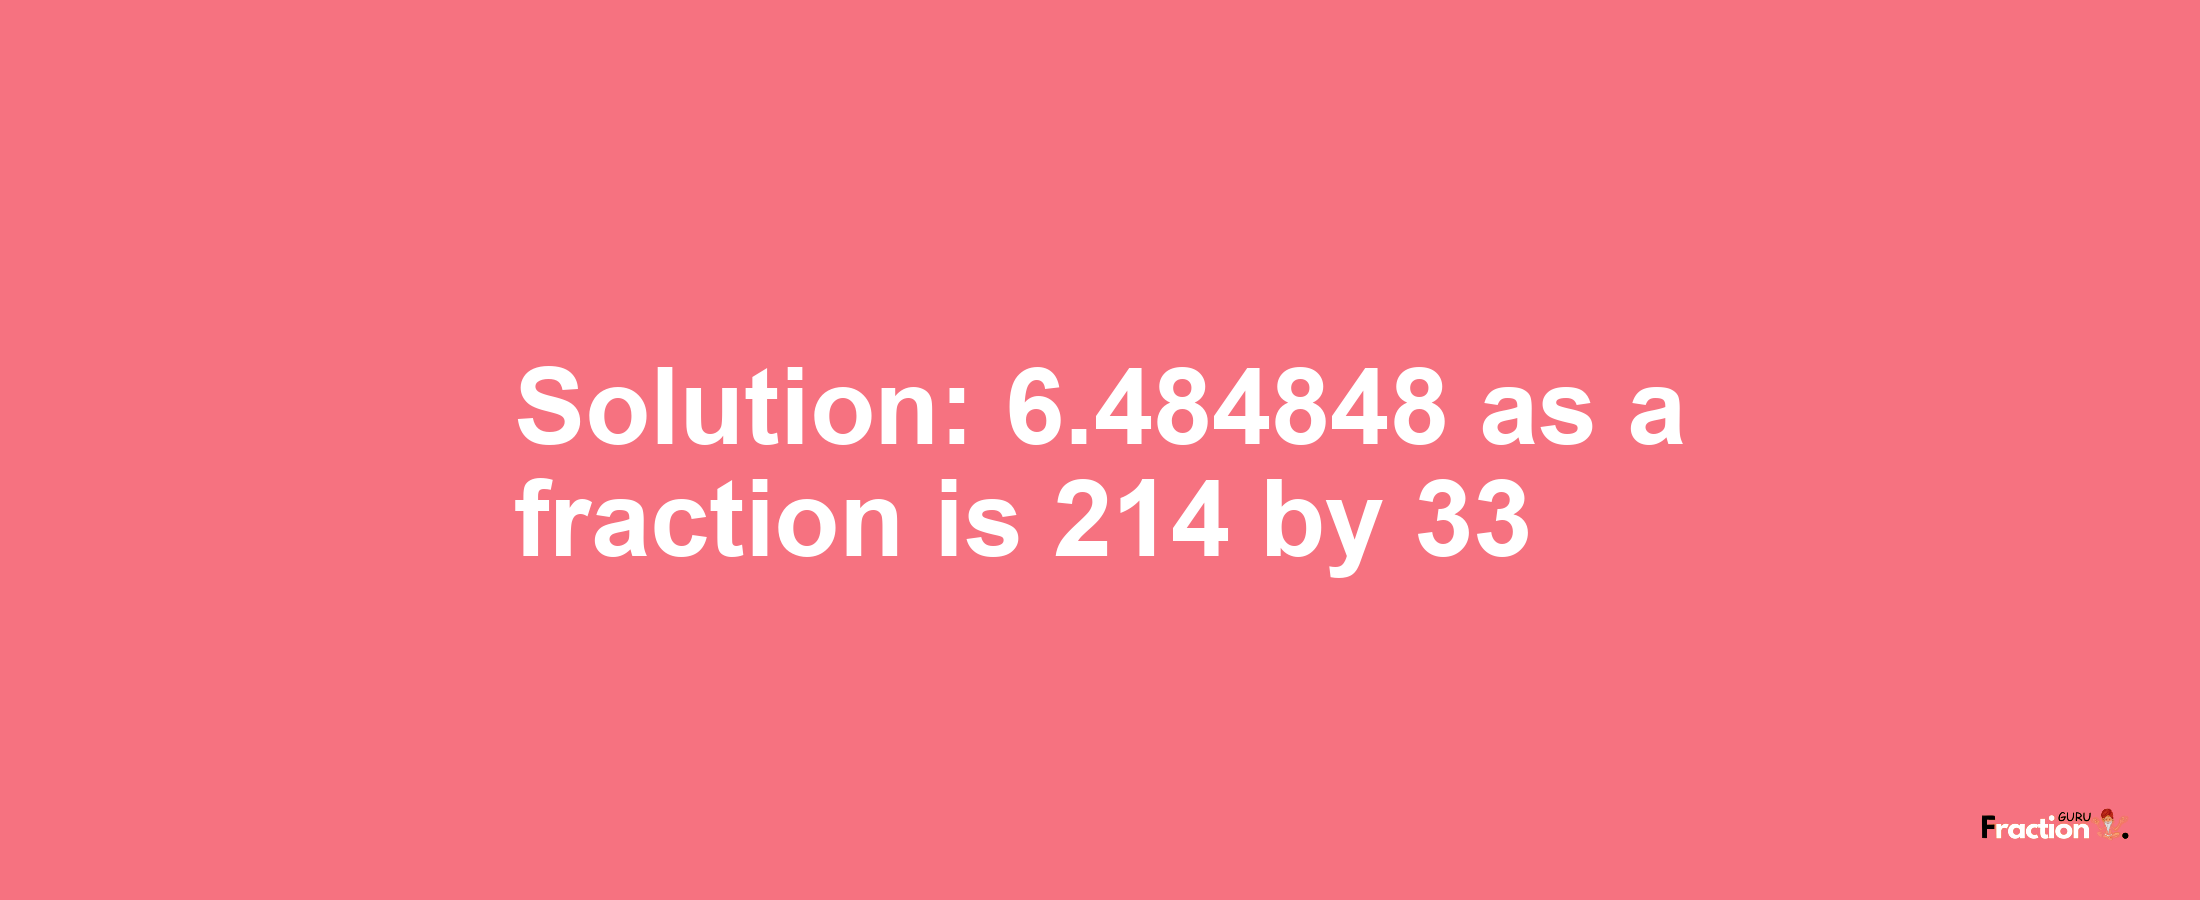 Solution:6.484848 as a fraction is 214/33